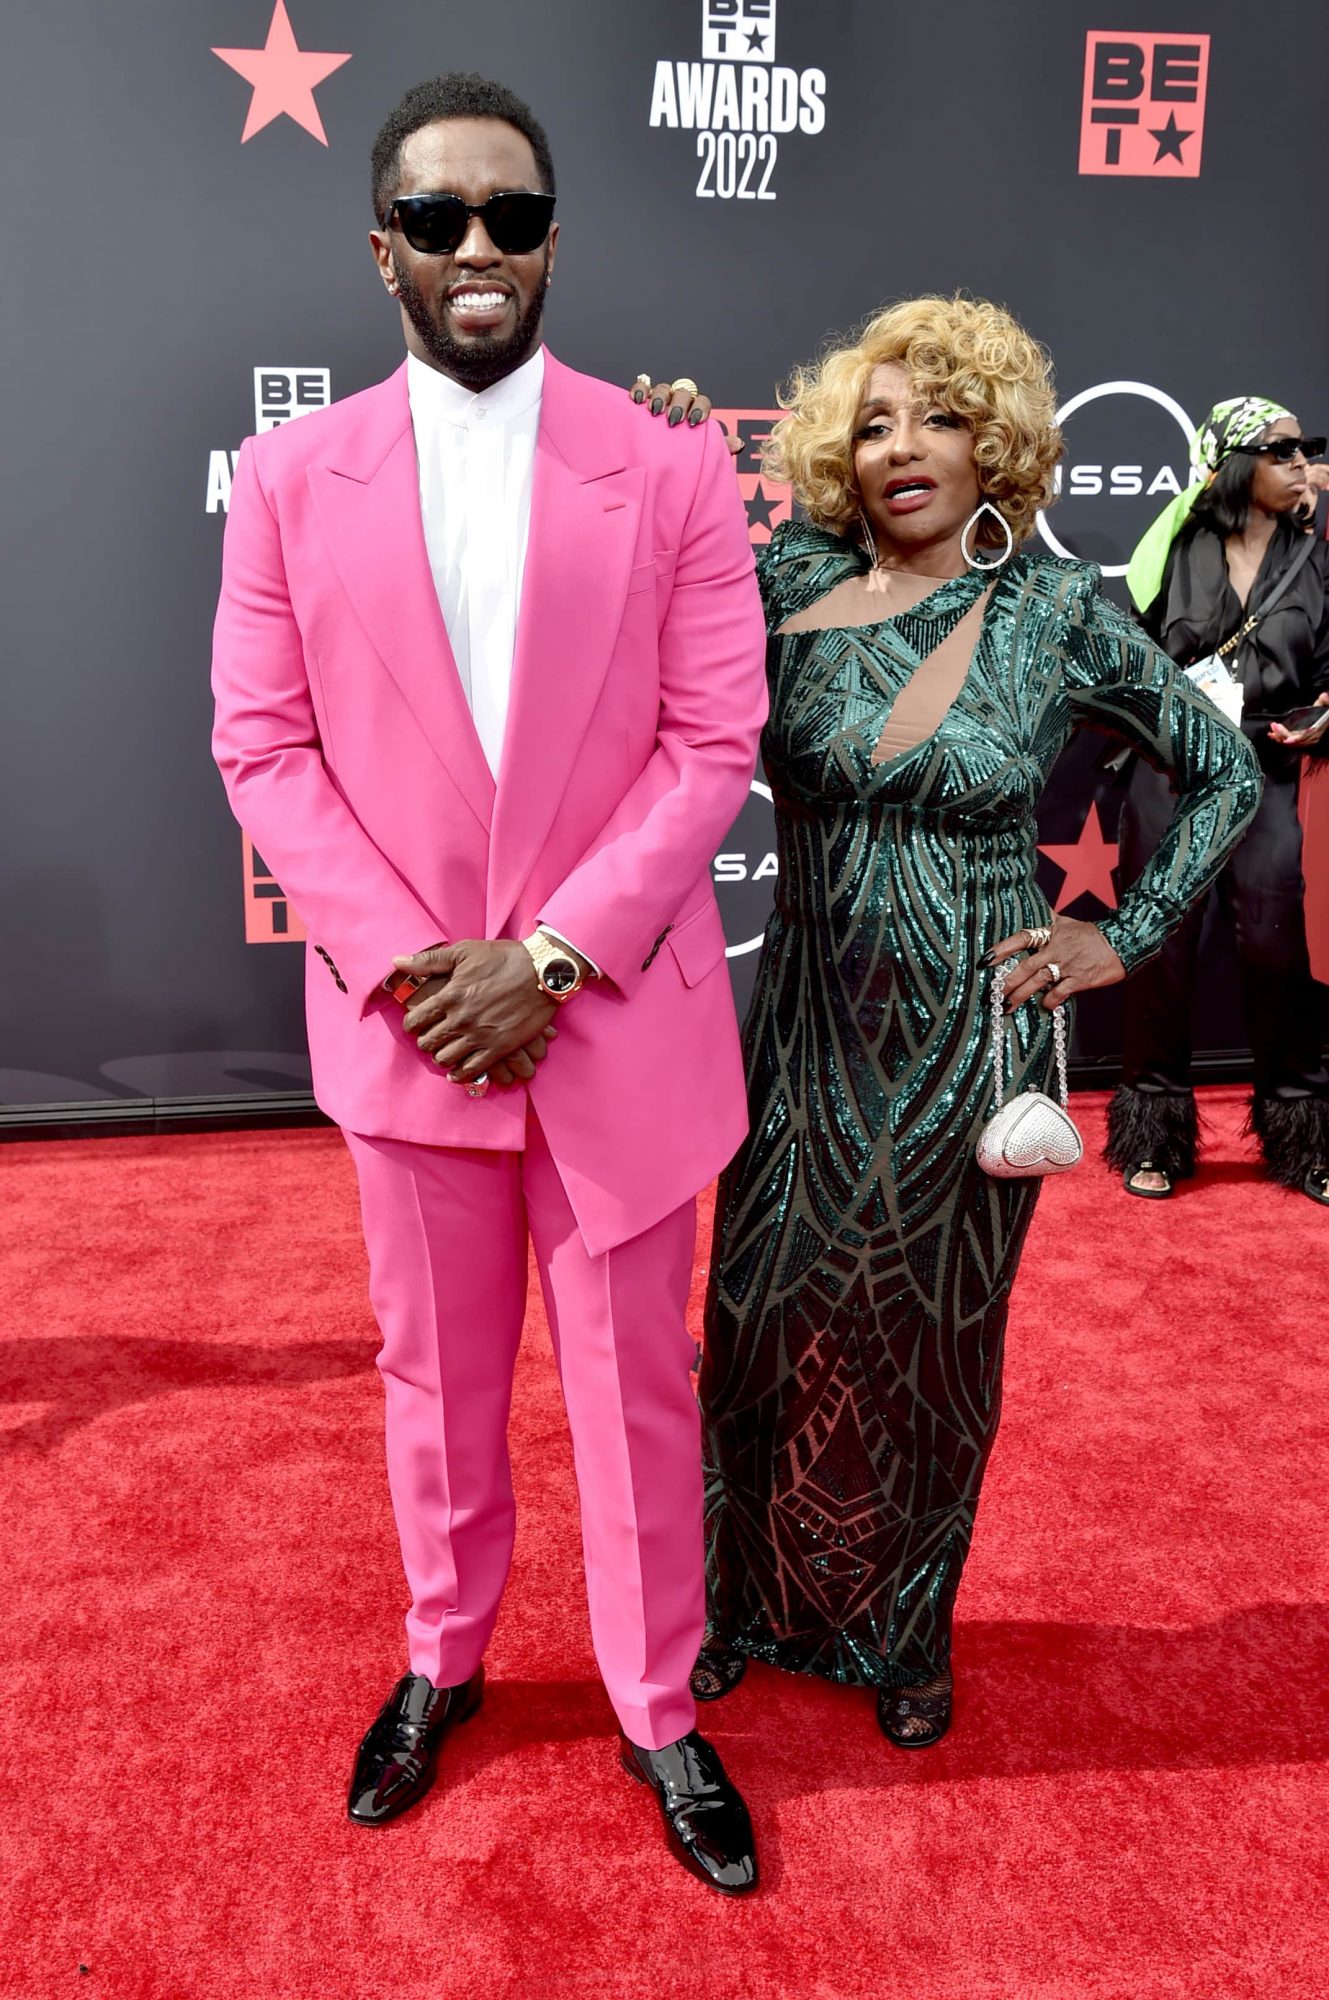 Sean "Diddy" Combs and Janice Combs attend the 2022 BET Awards